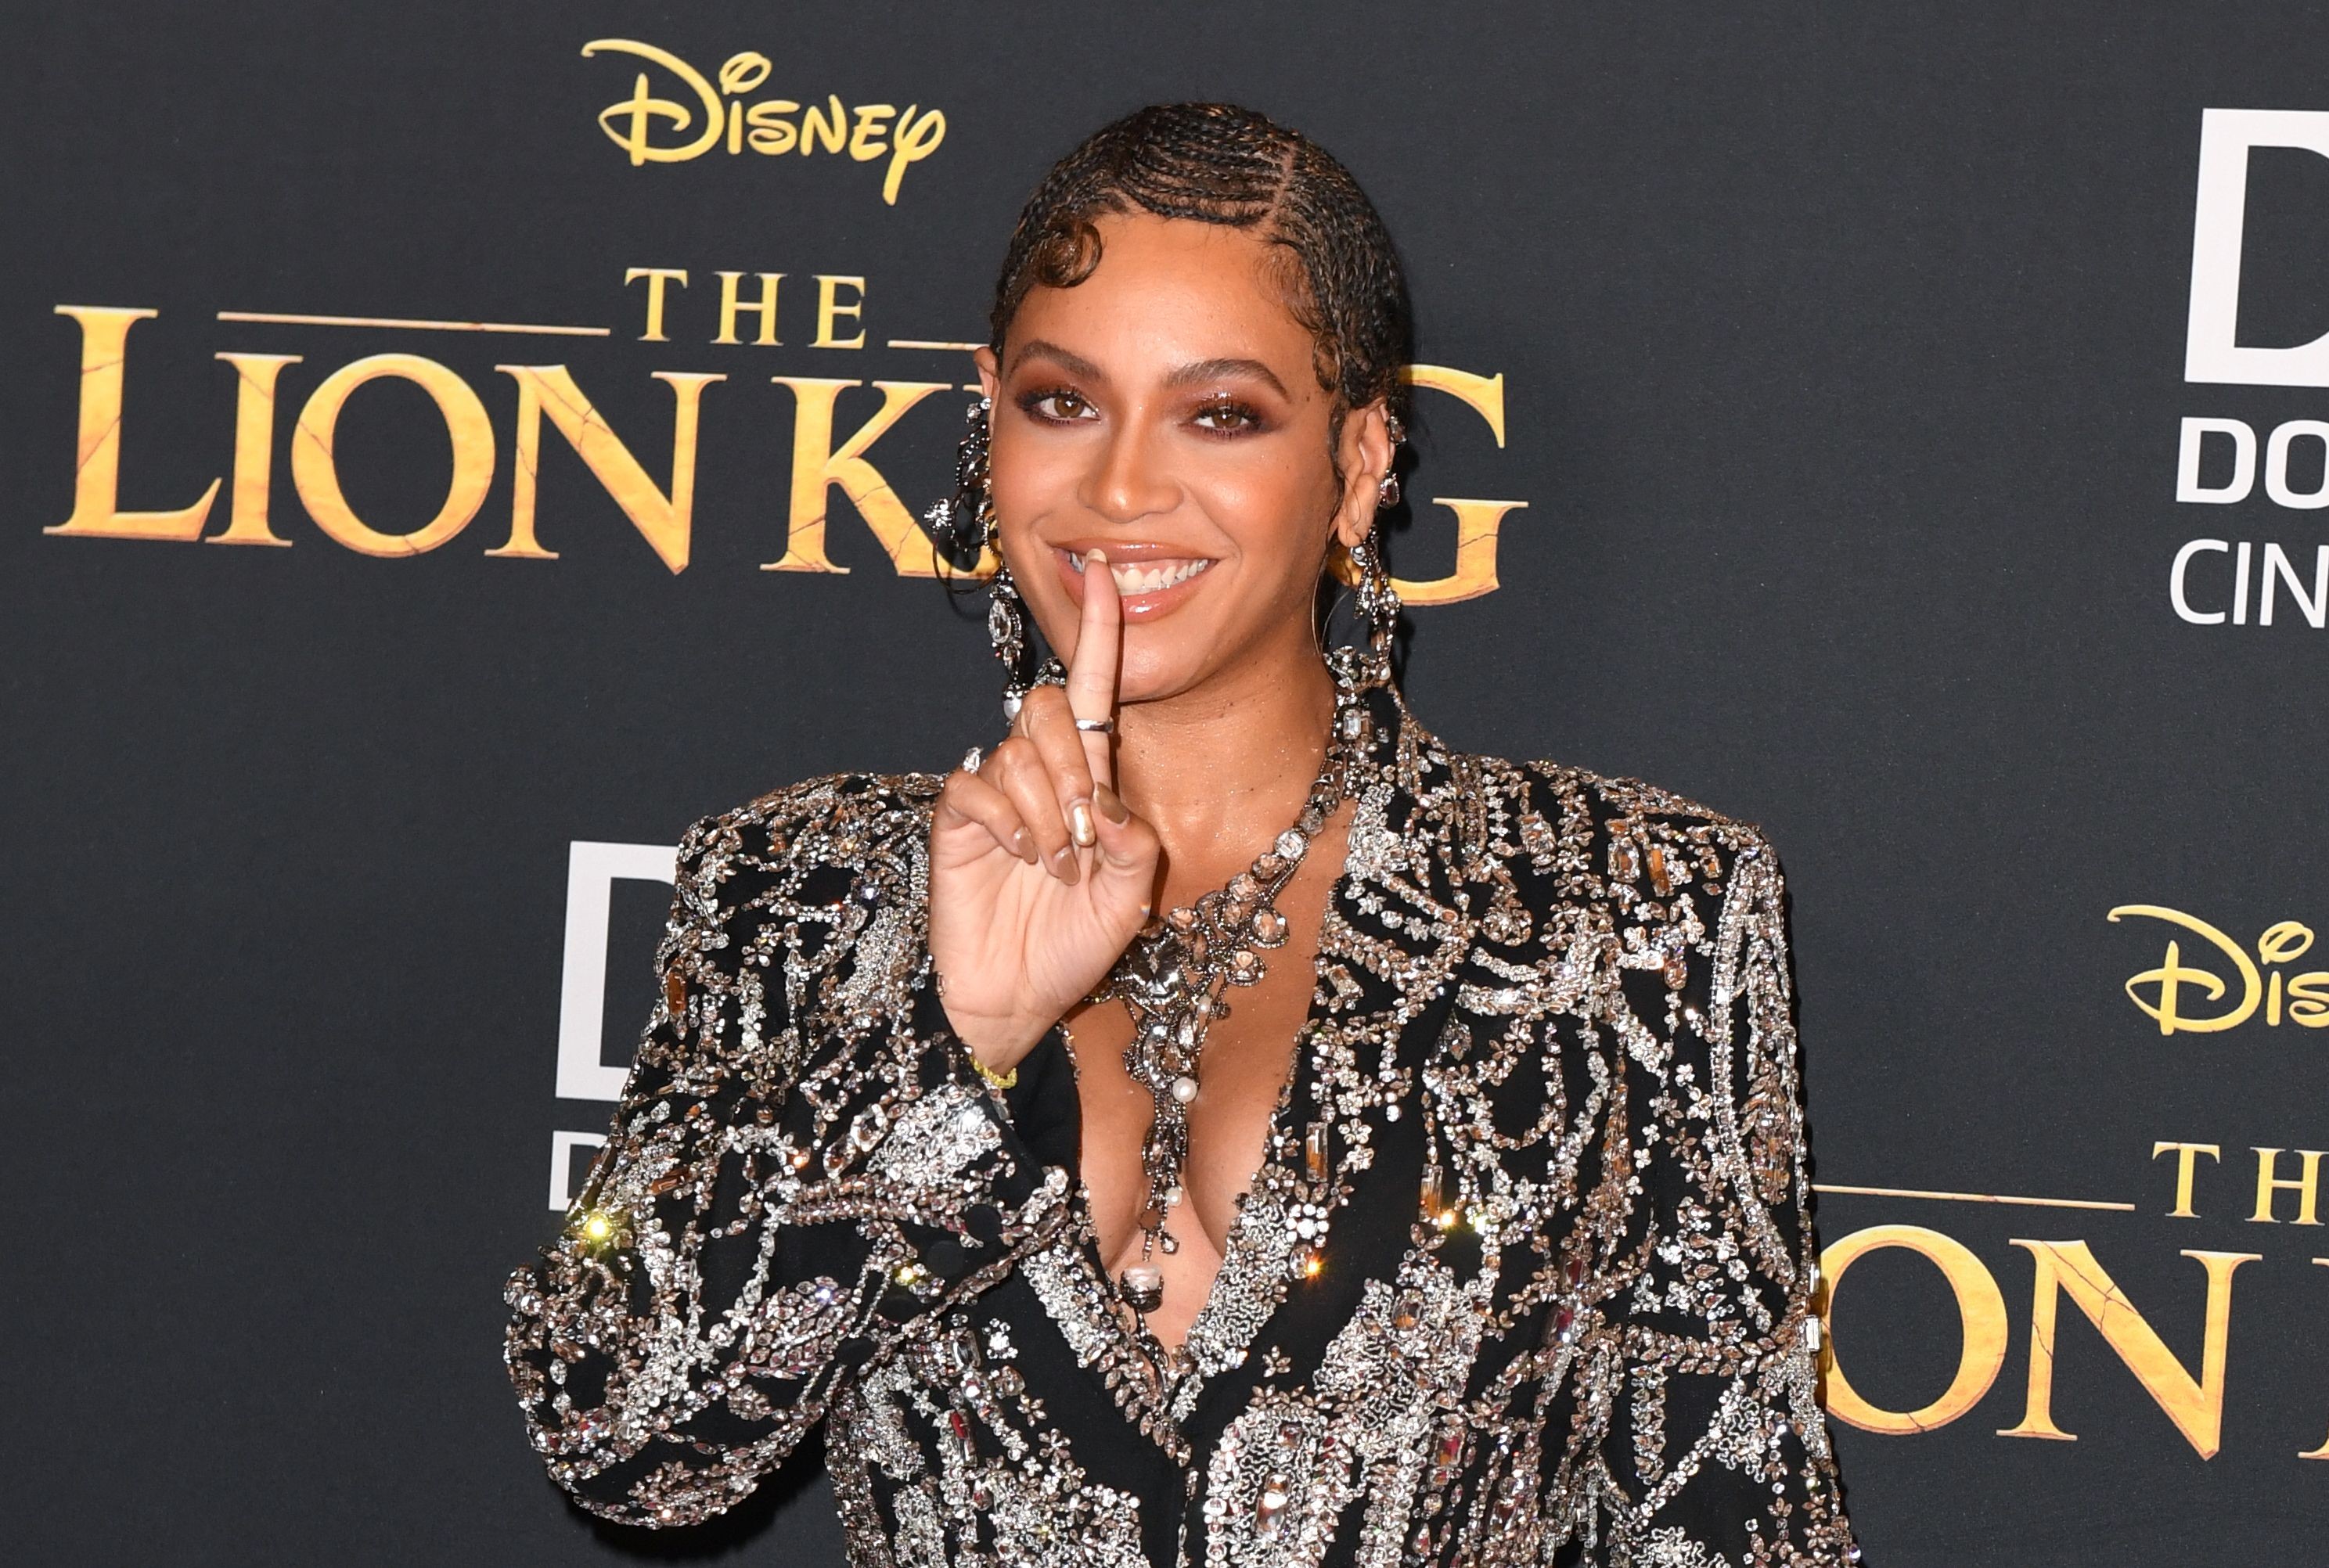 Ahead of her Coachella appearance last year, Beyoncé switched to a plant-based diet to get back in shape after giving birth to twins. Photo: AFP